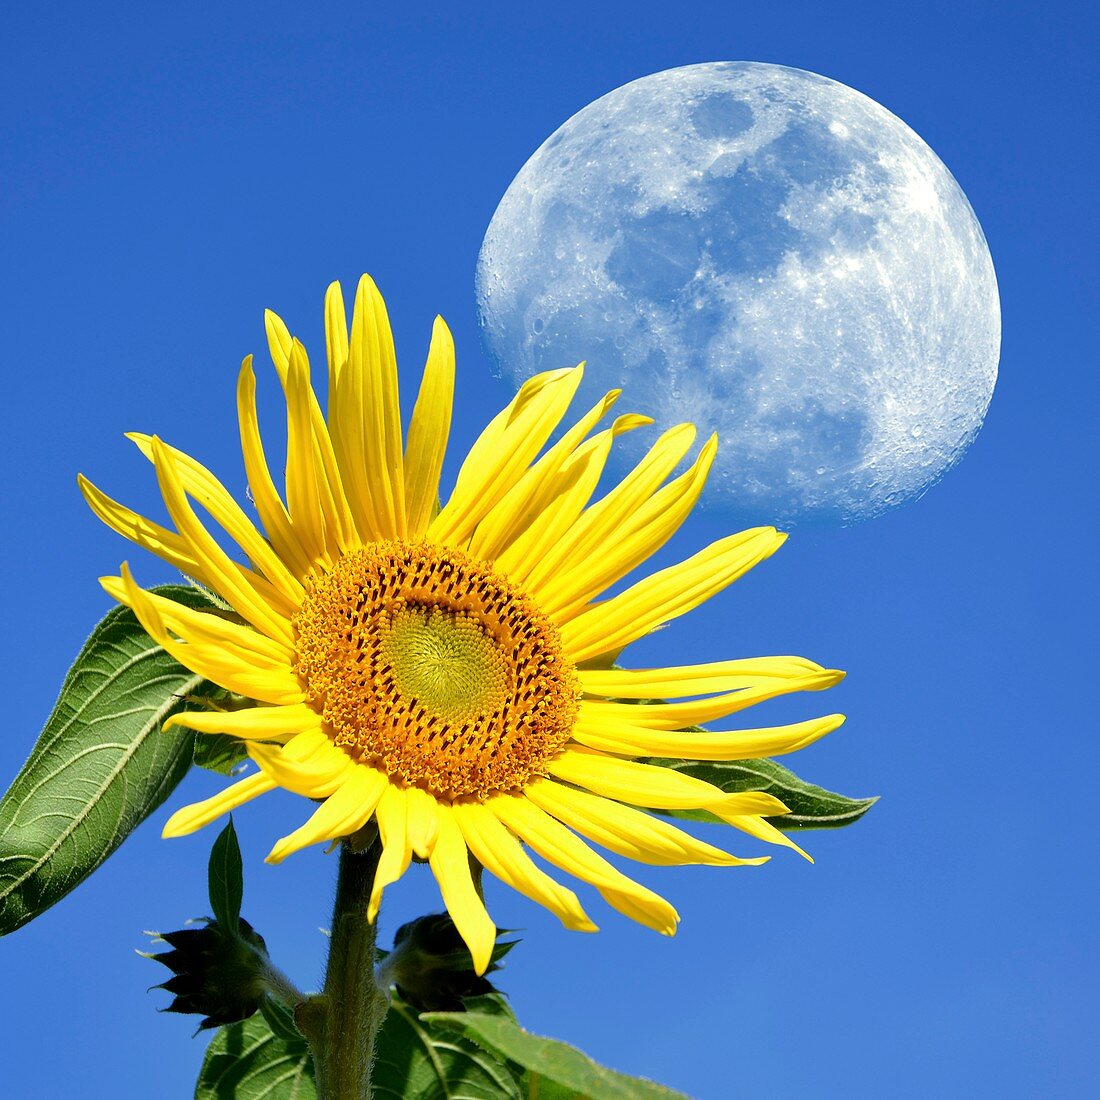 Moon and sunflower